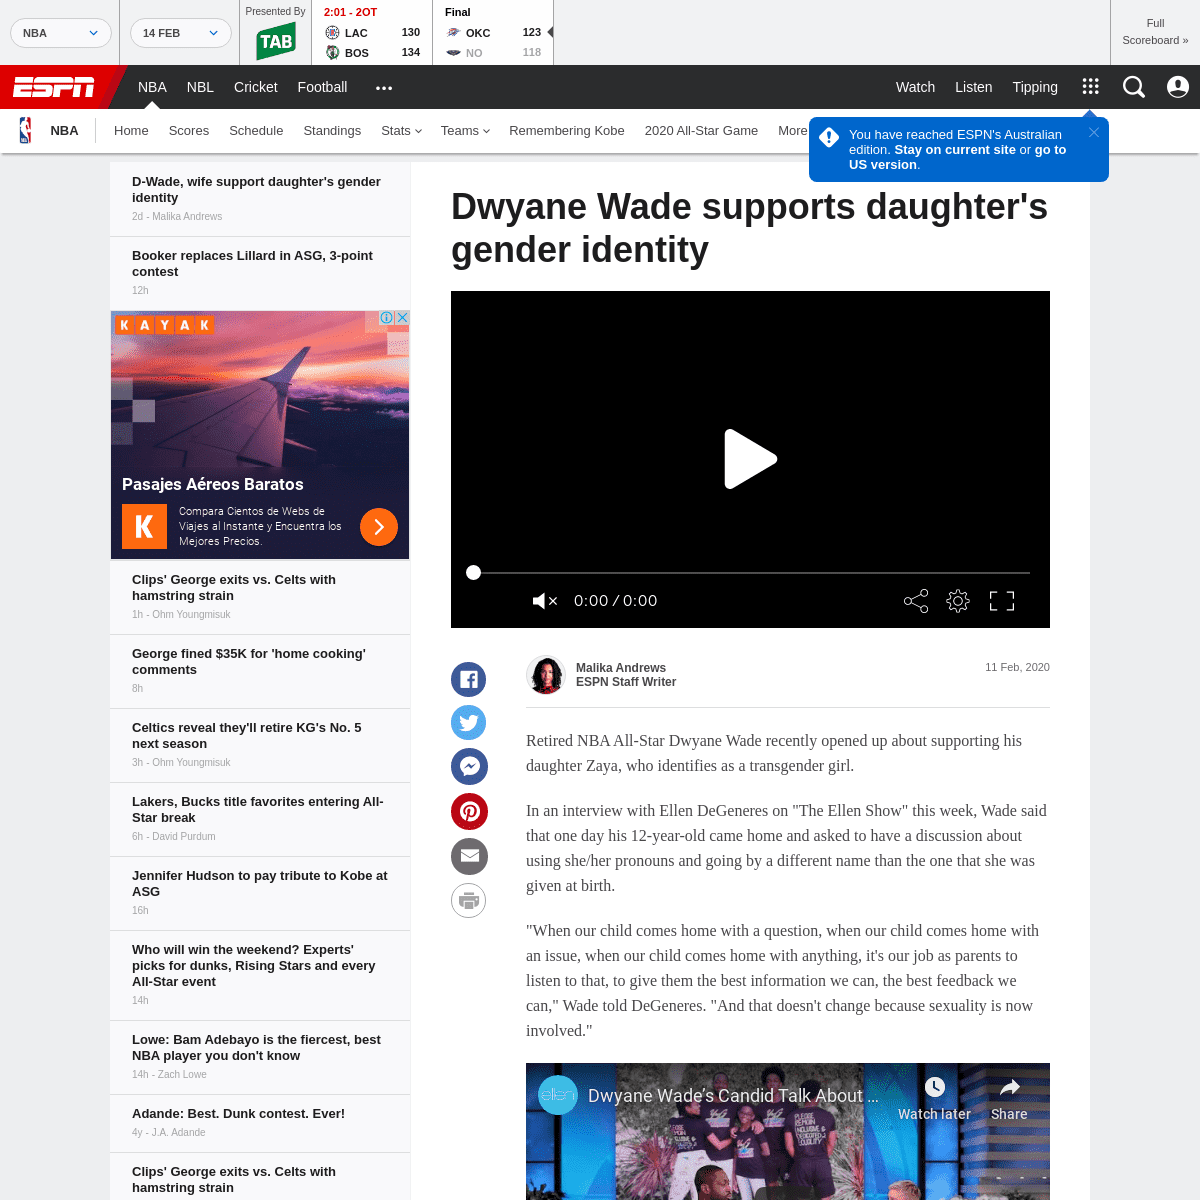 A complete backup of www.espn.com.au/nba/story/_/id/28681410/dwyane-wade-supports-daughter-gender-identity